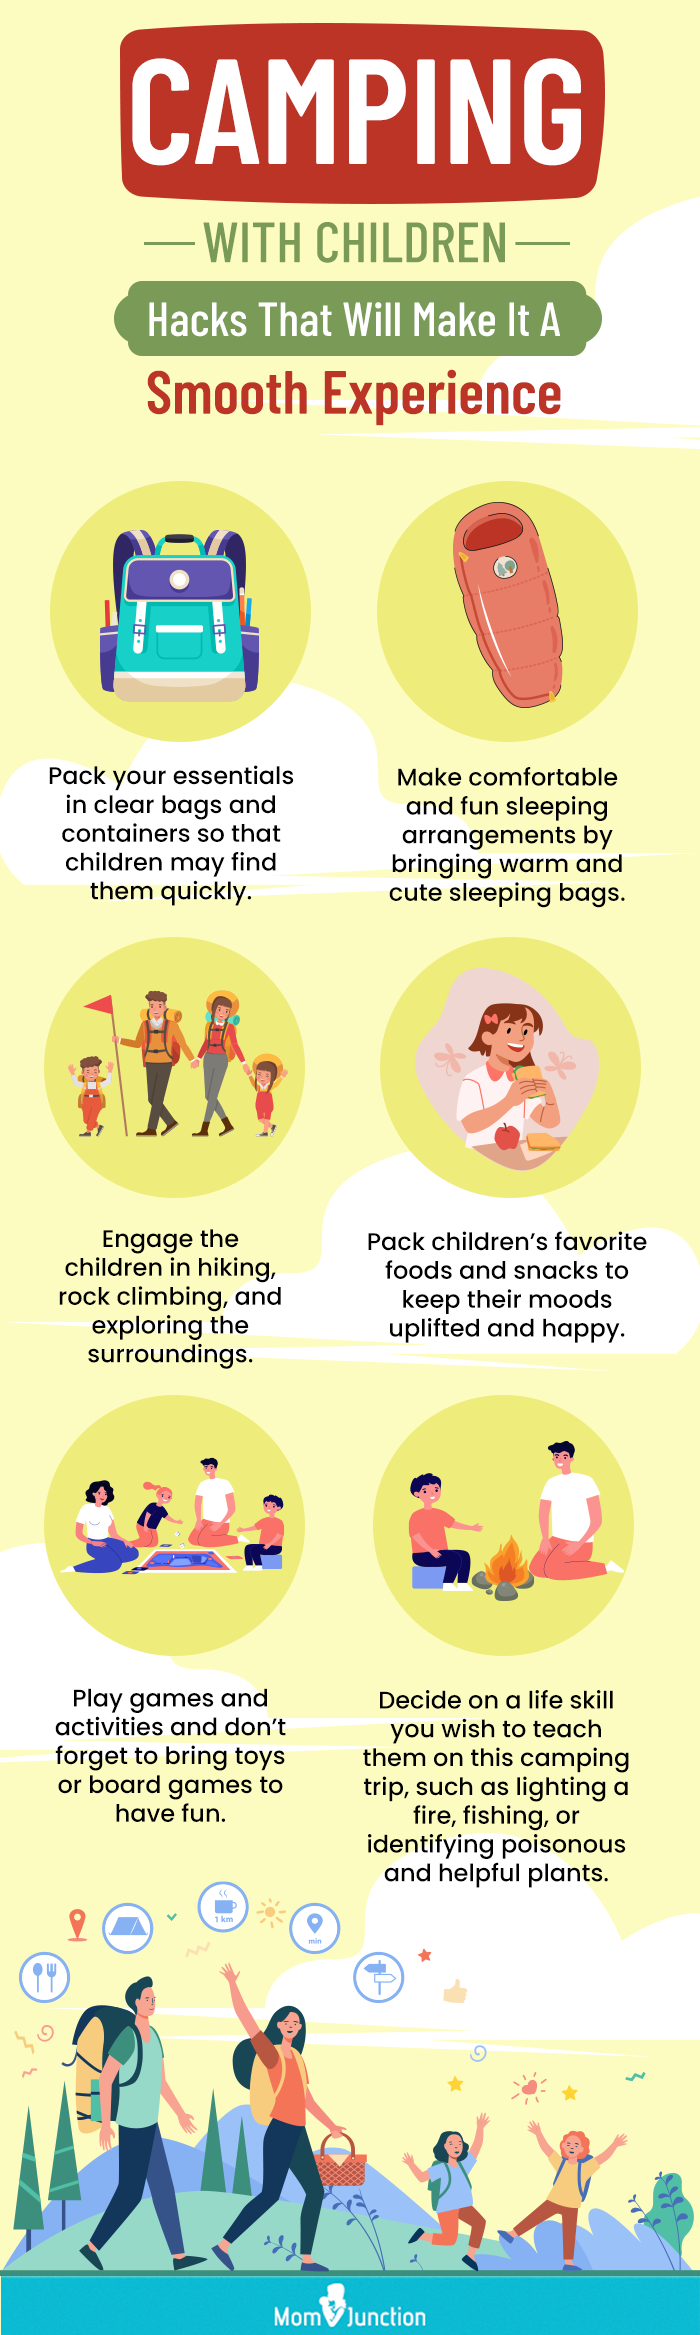 camping with childen hacks that will make a smooth experience (infographic)